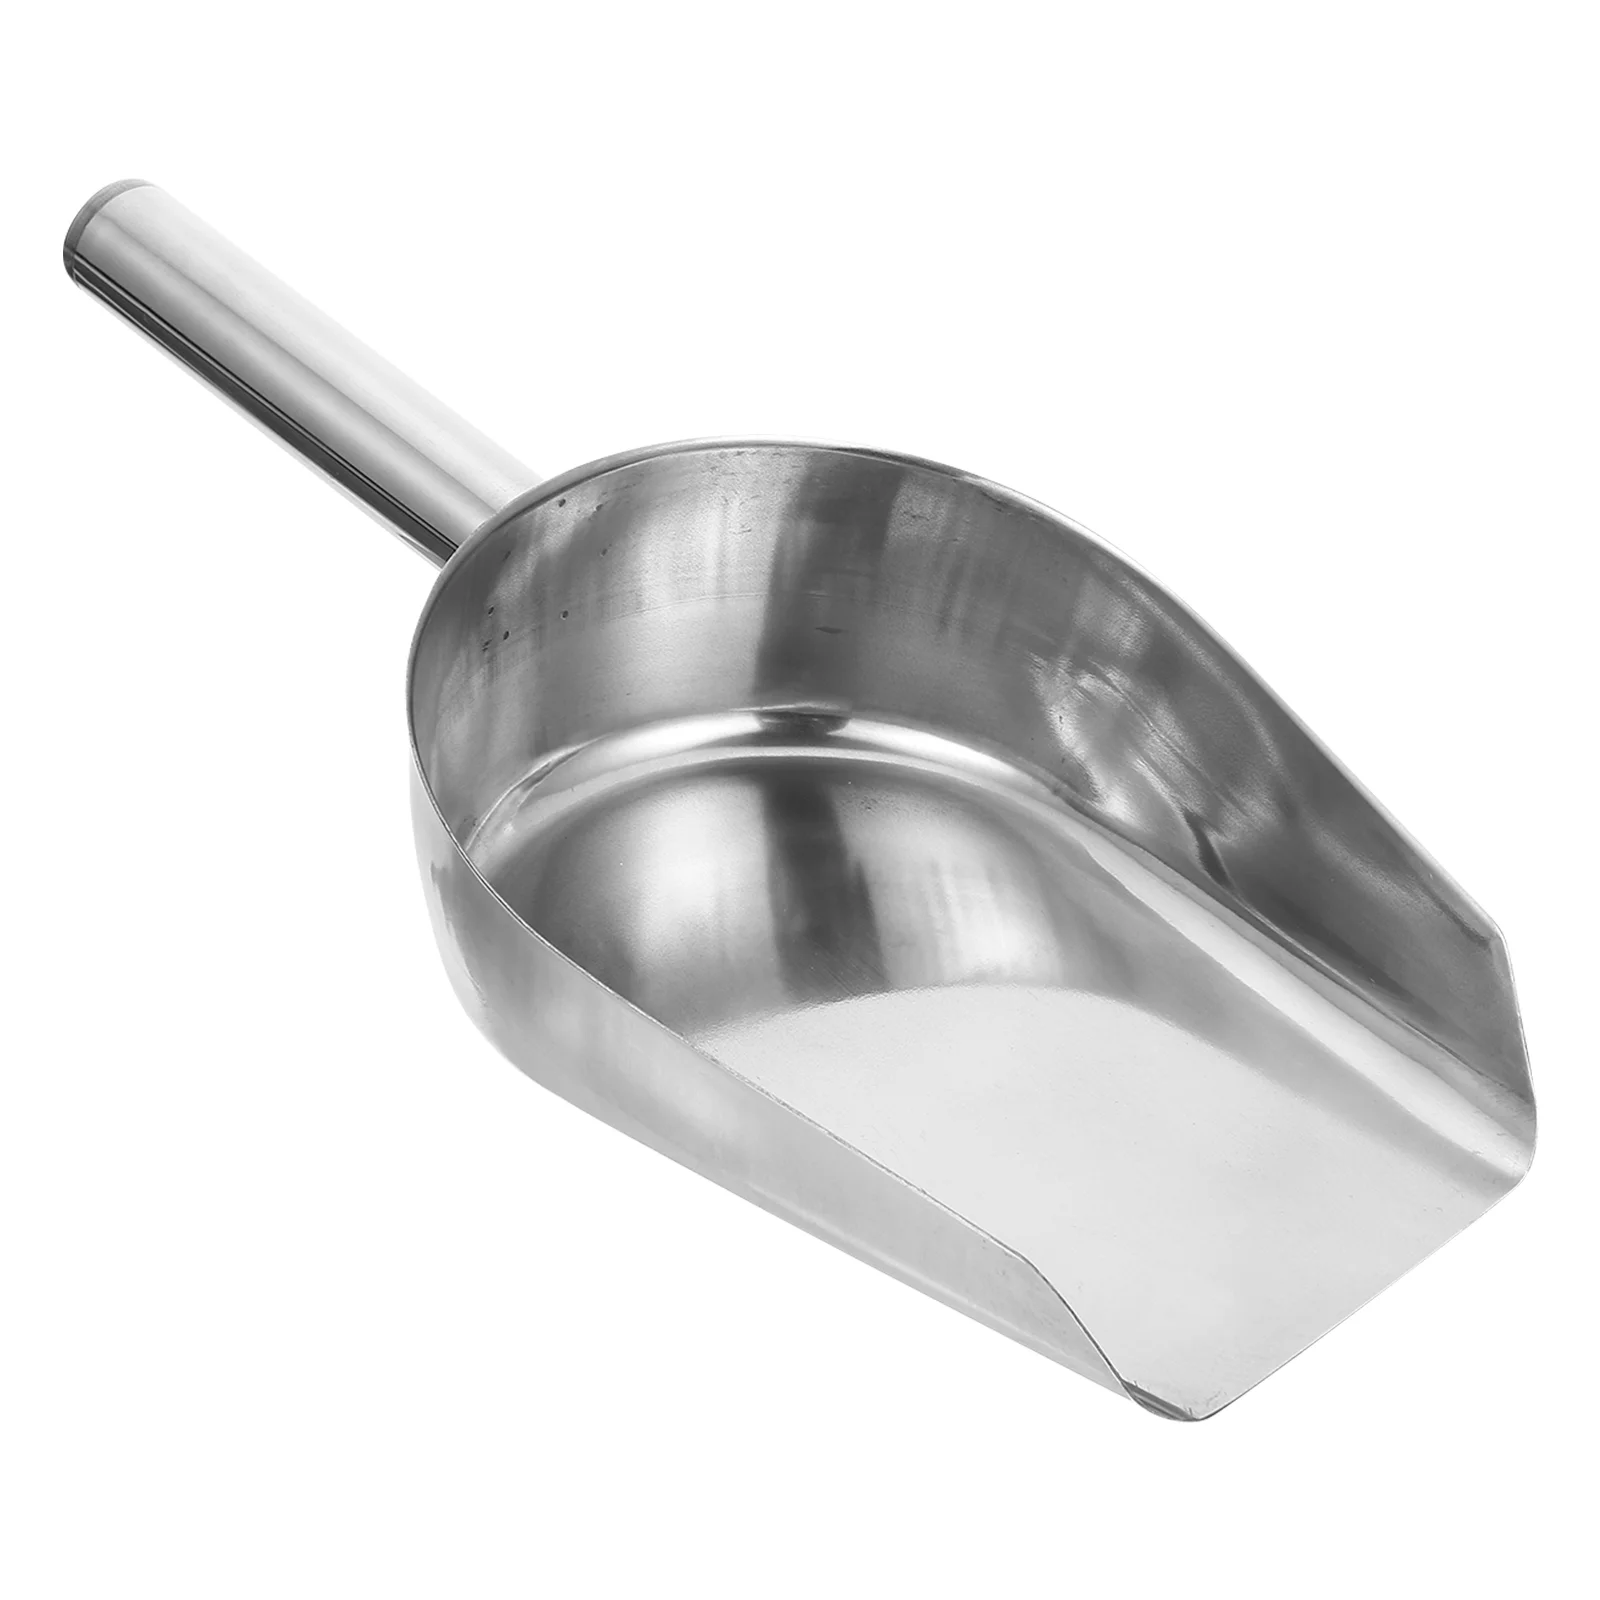 

Scoop Ice Scooper Metal Scoops Flour Stainless Steel Kitchen Coffee Bar Cube Popcorn Pet Rice Utility Candy Buffet Bean Dry